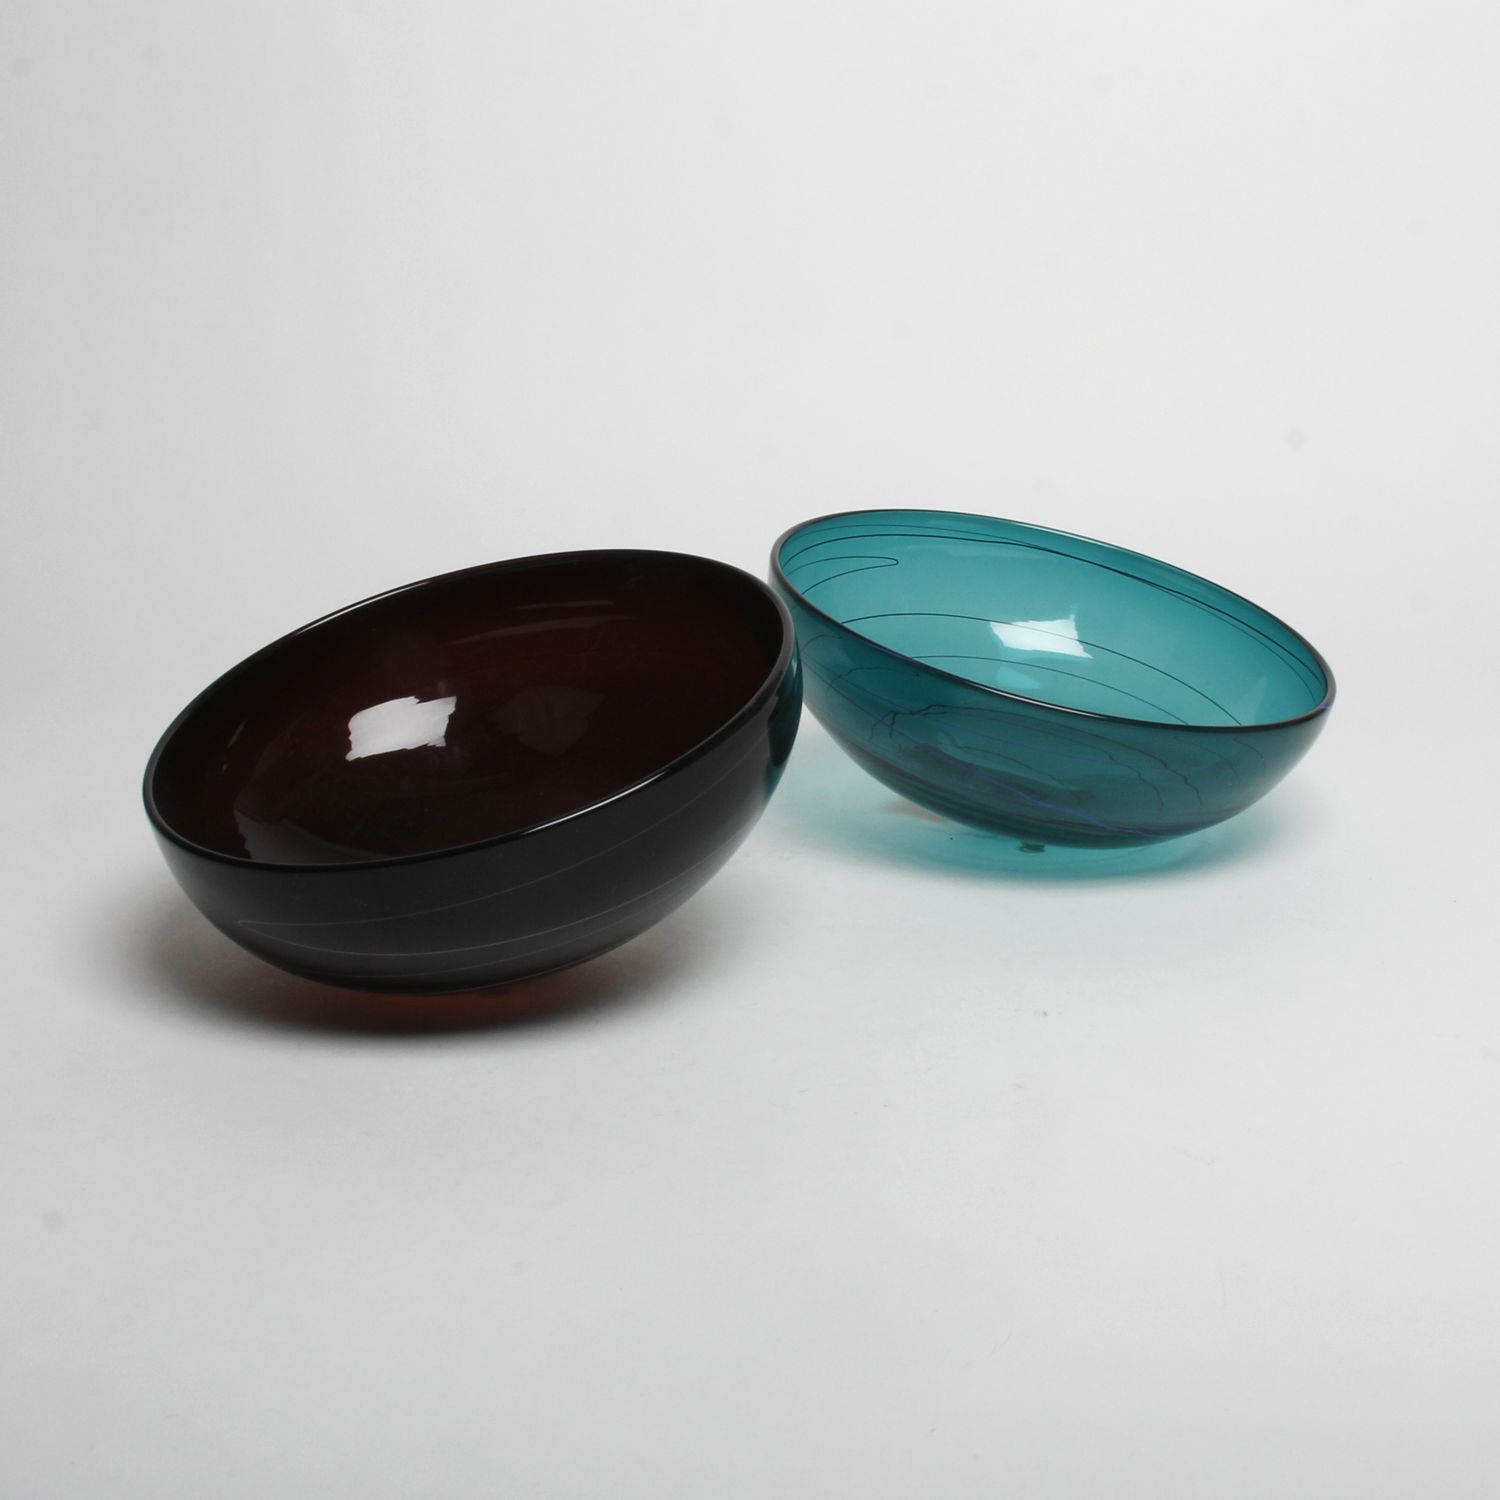 Eidos Glass Designs: Bowl (Each sold separately) Product Image 1 of 5